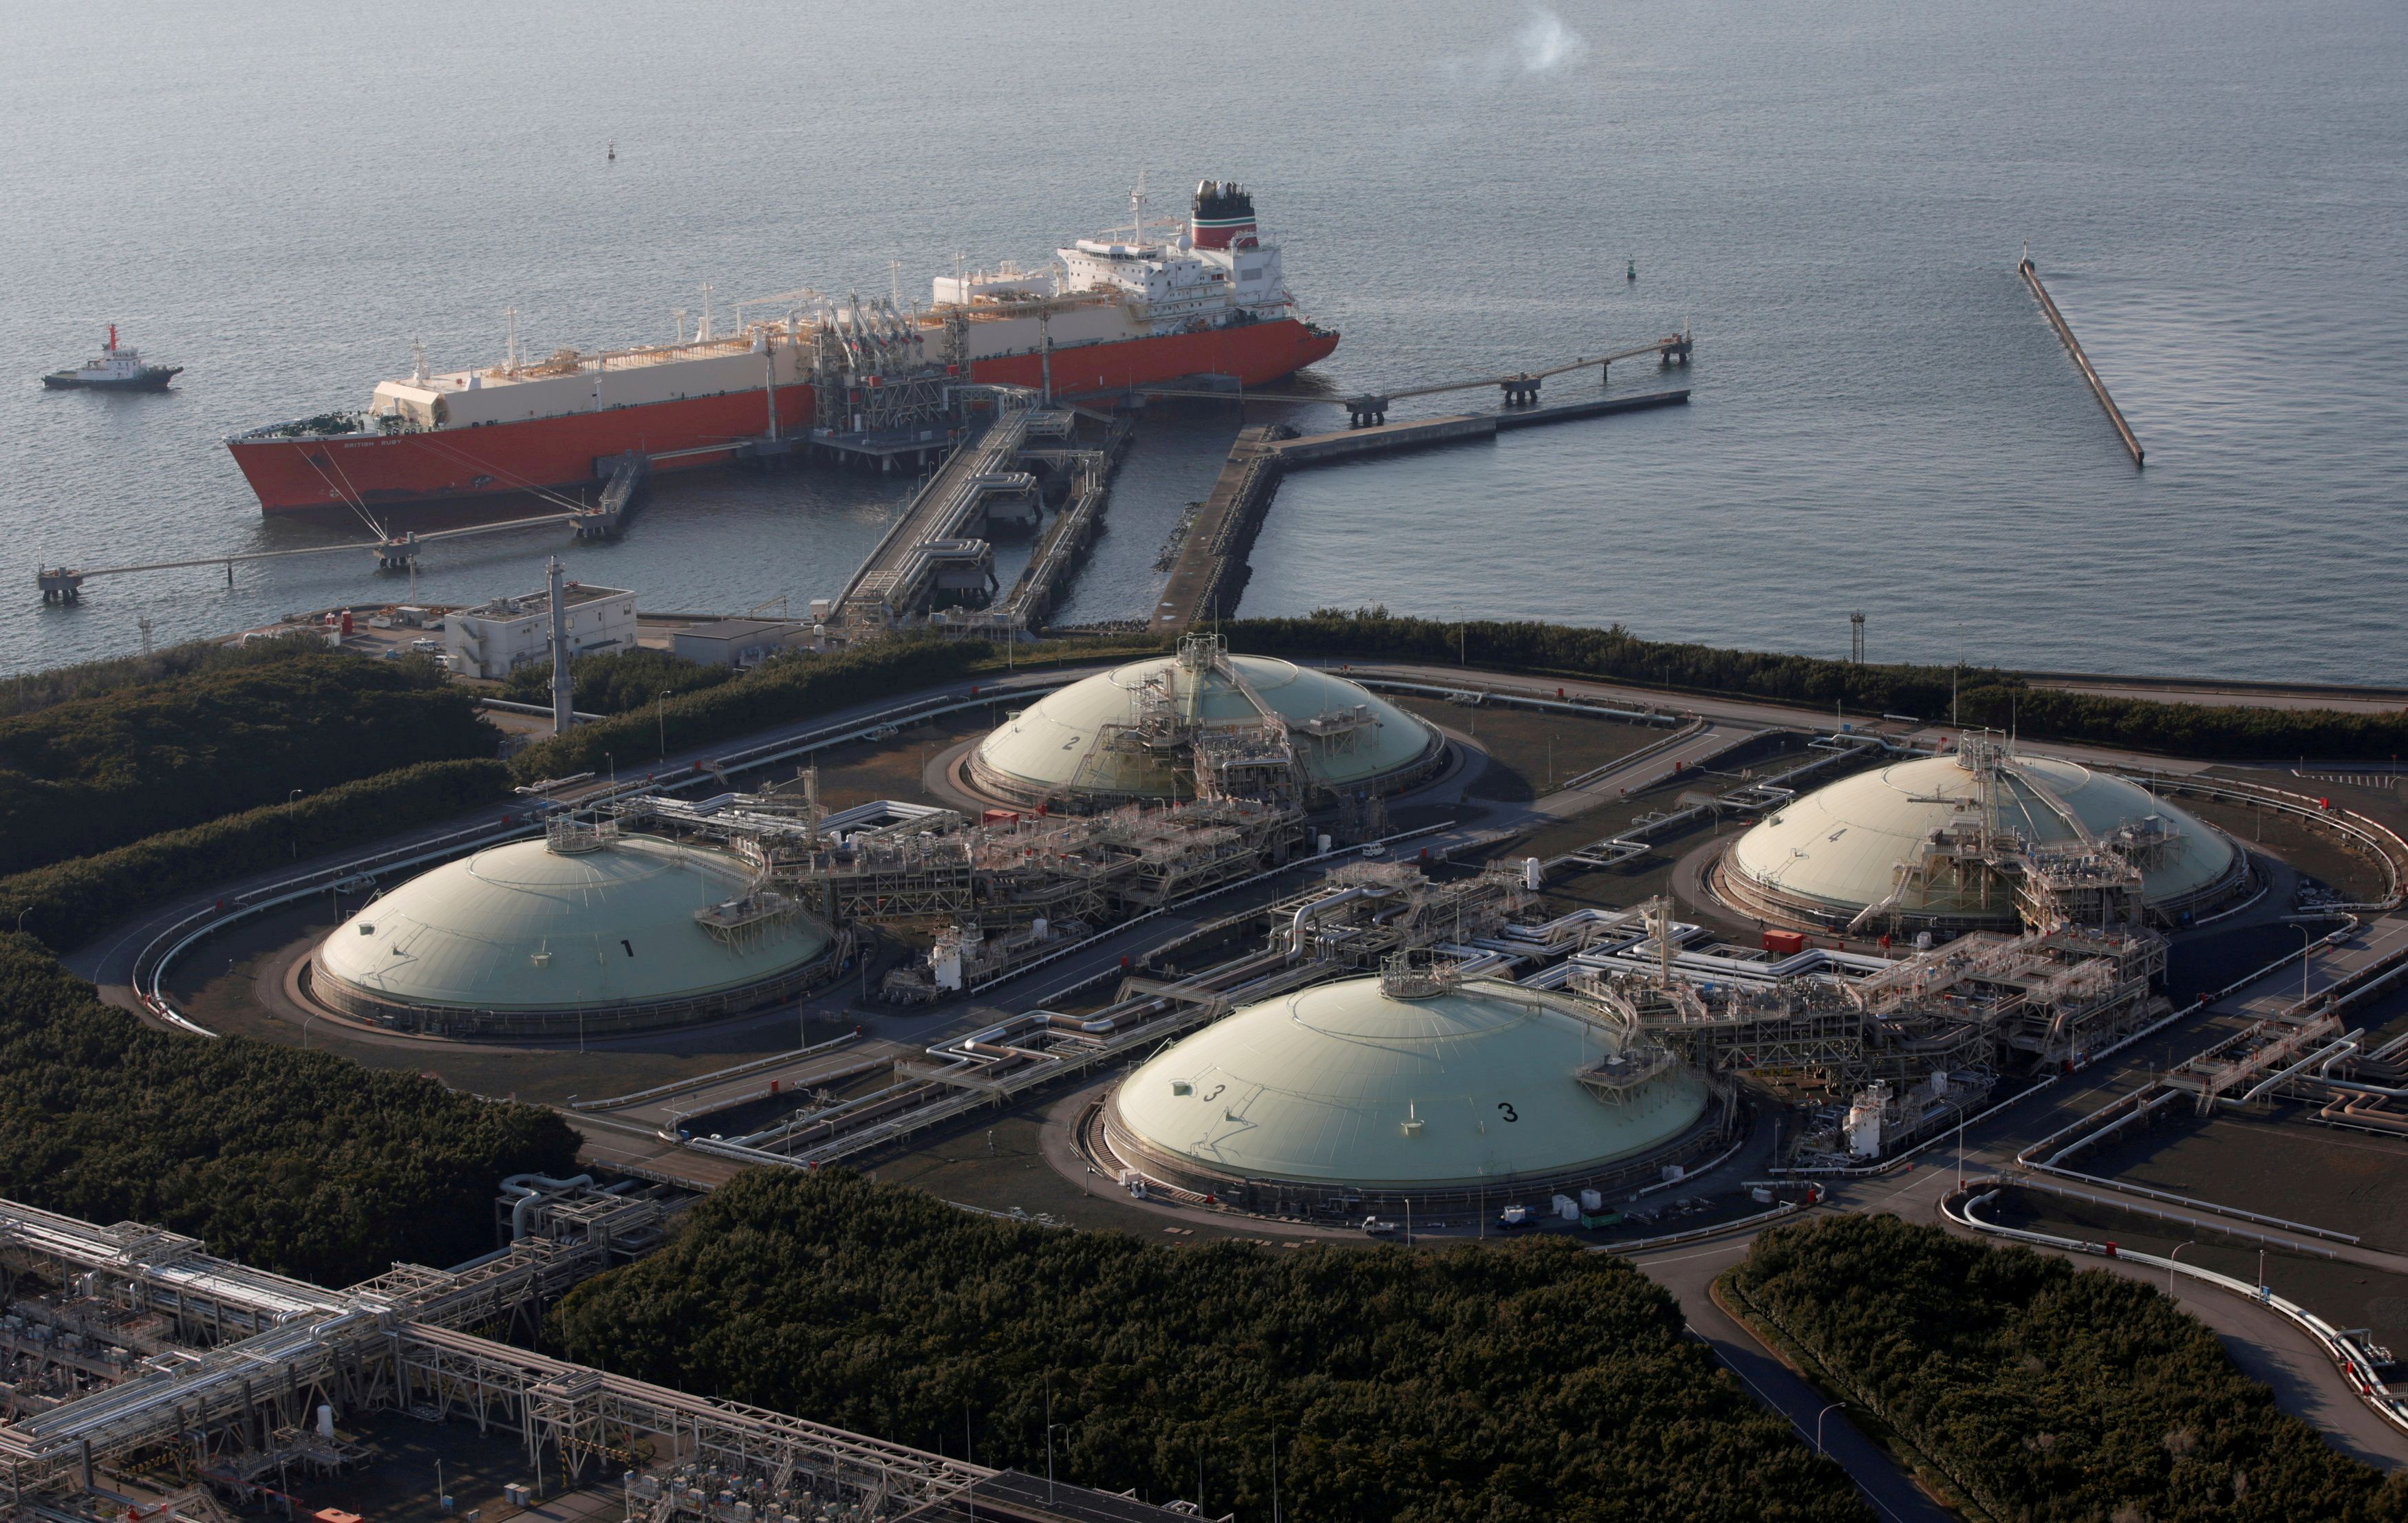 Liquefied natural gas storage tanks and a membrane-type tanker are seen at Tokyo Electric Power Co.'s Futtsu Thermal Power Station in Futtsu, Japan